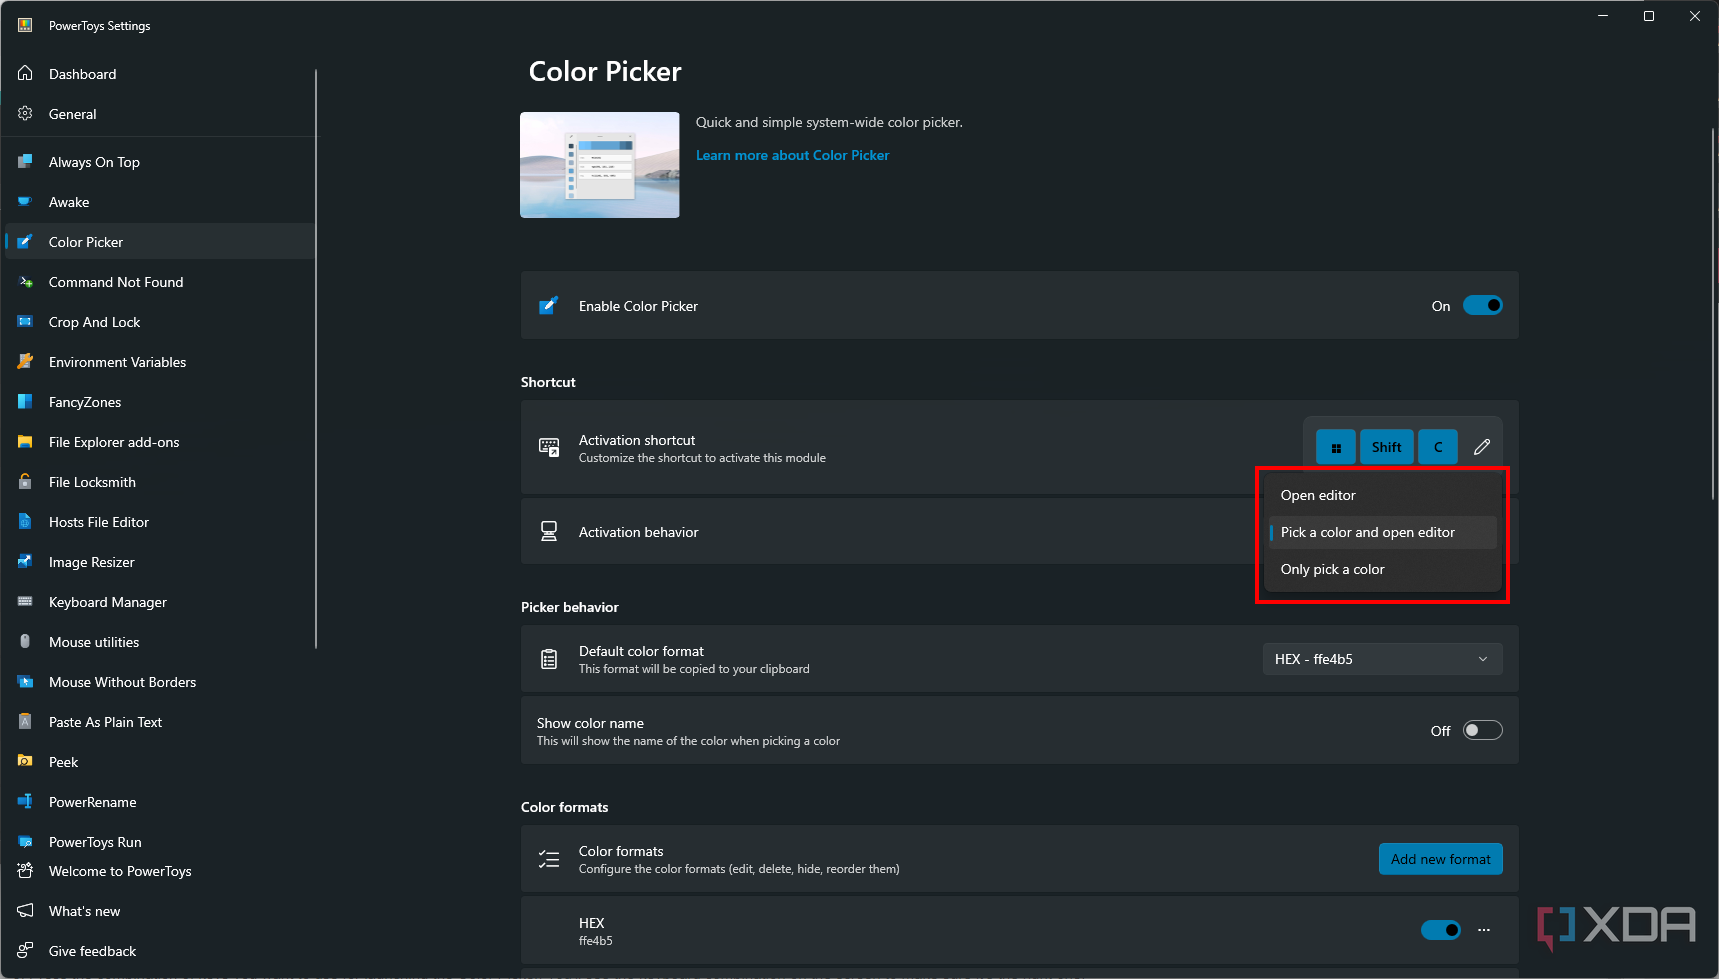 Screenshot of PowerToys settings showing the menu to customize the behavior of color picker after choosing a color